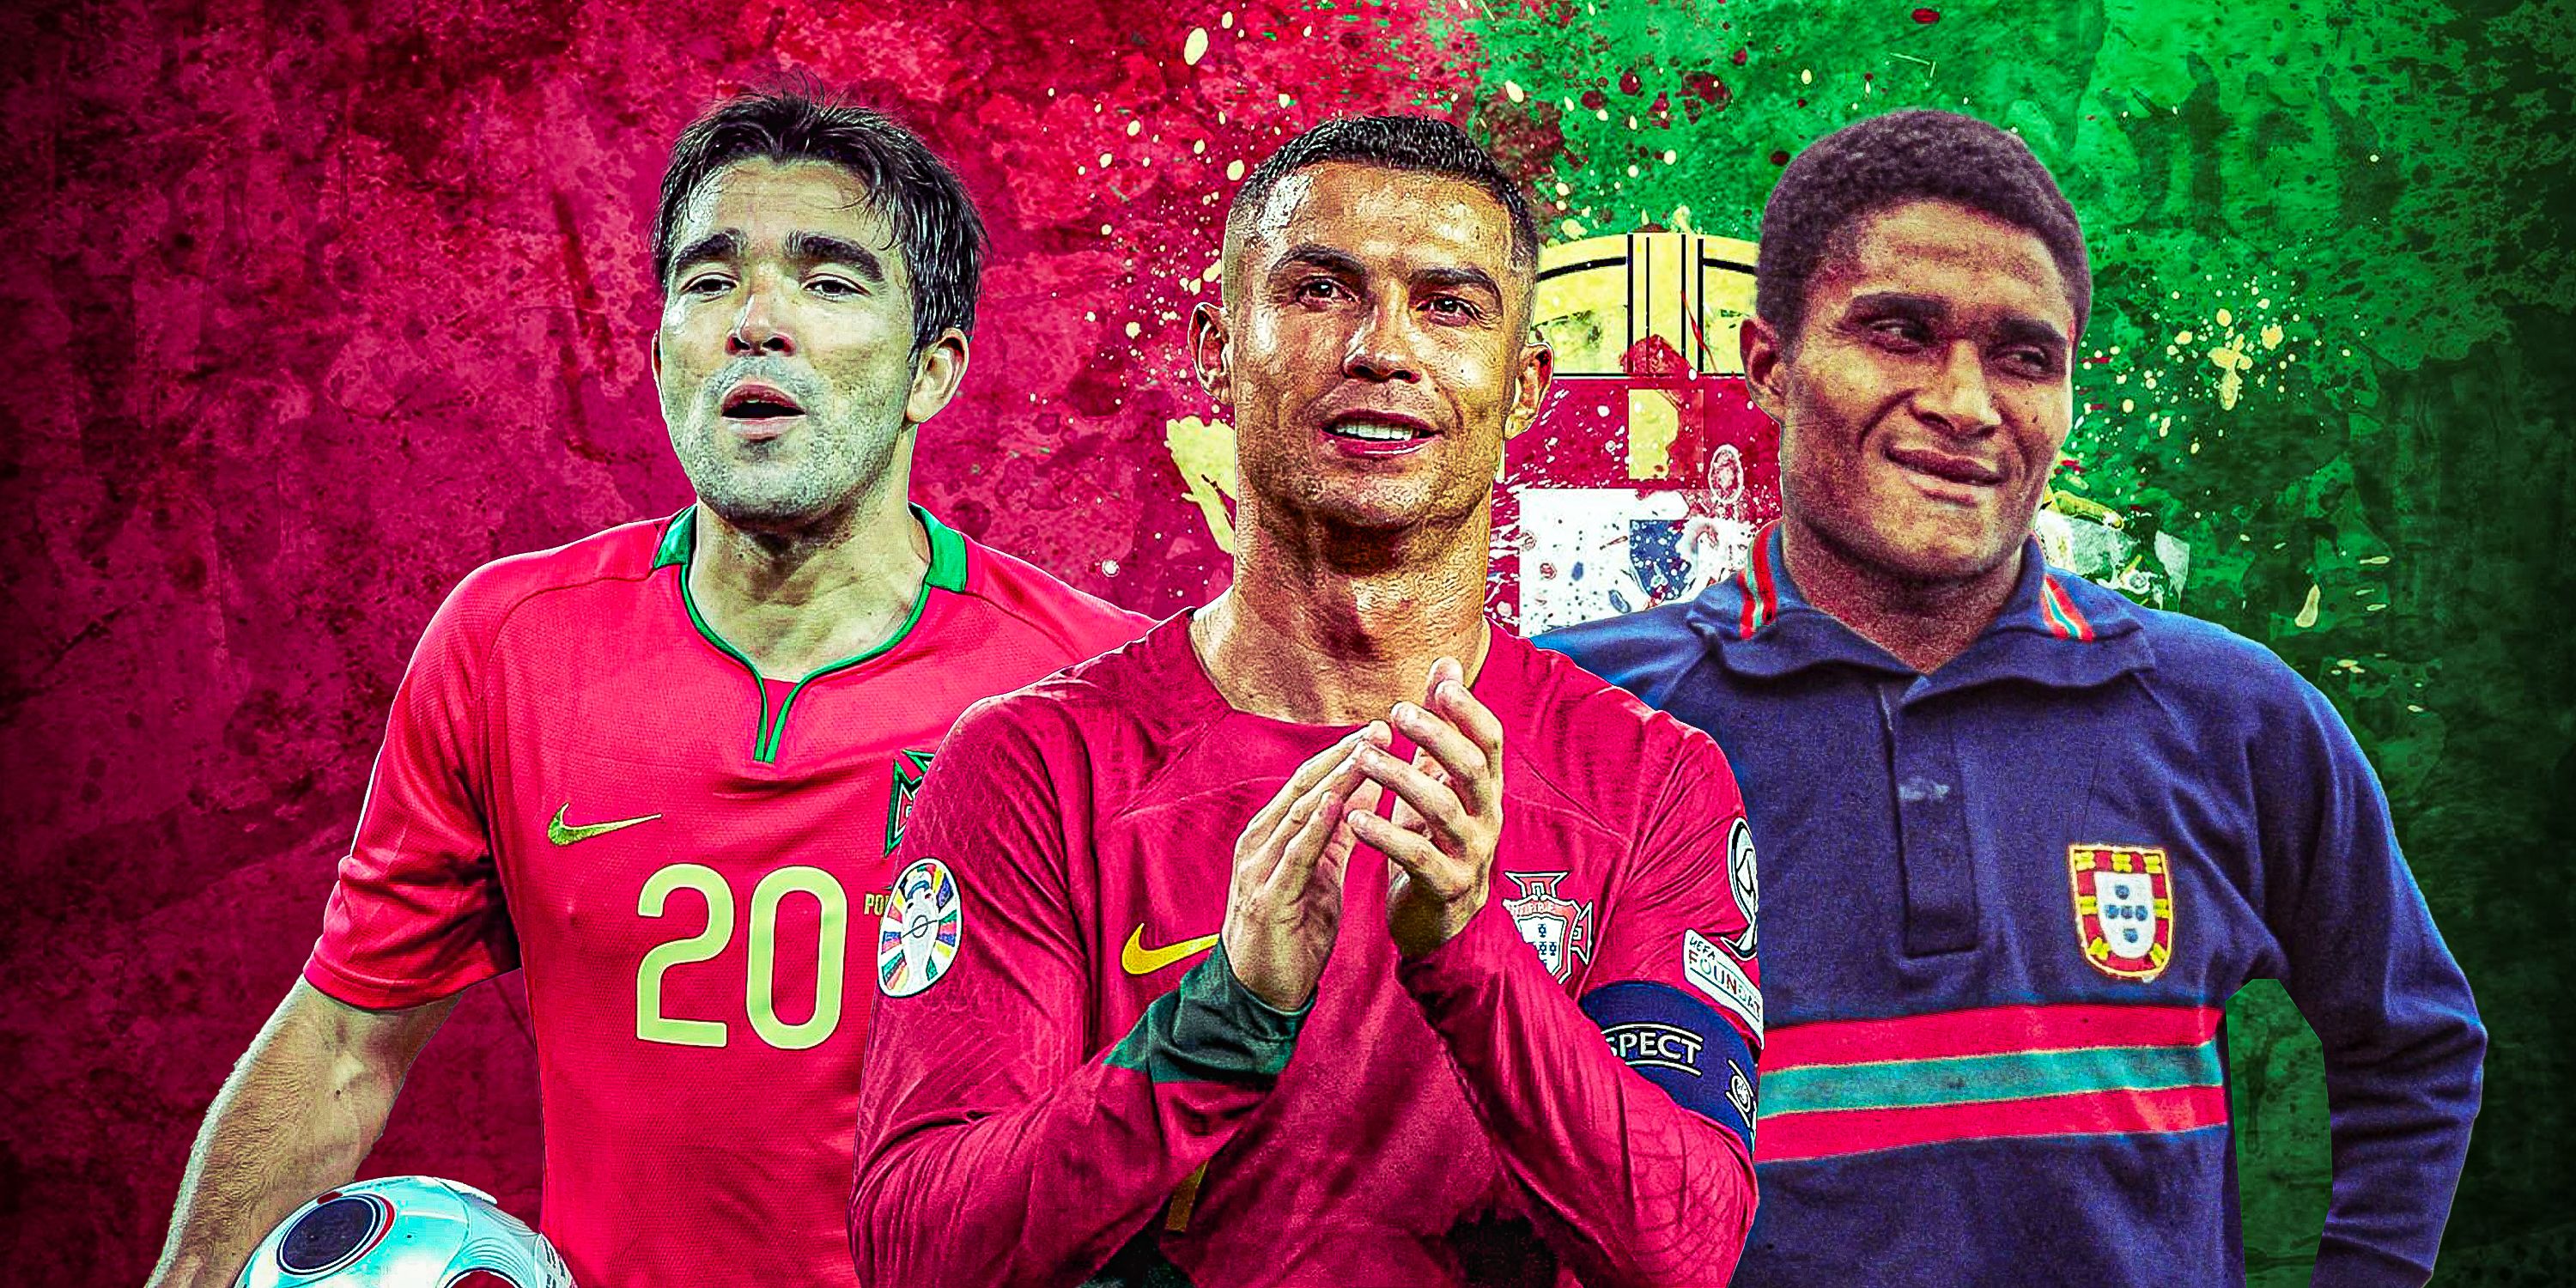 Cristiano Ronaldo in the middle with Eusebio and Deco on either side (all in Portugal kit) with Portugal theme background